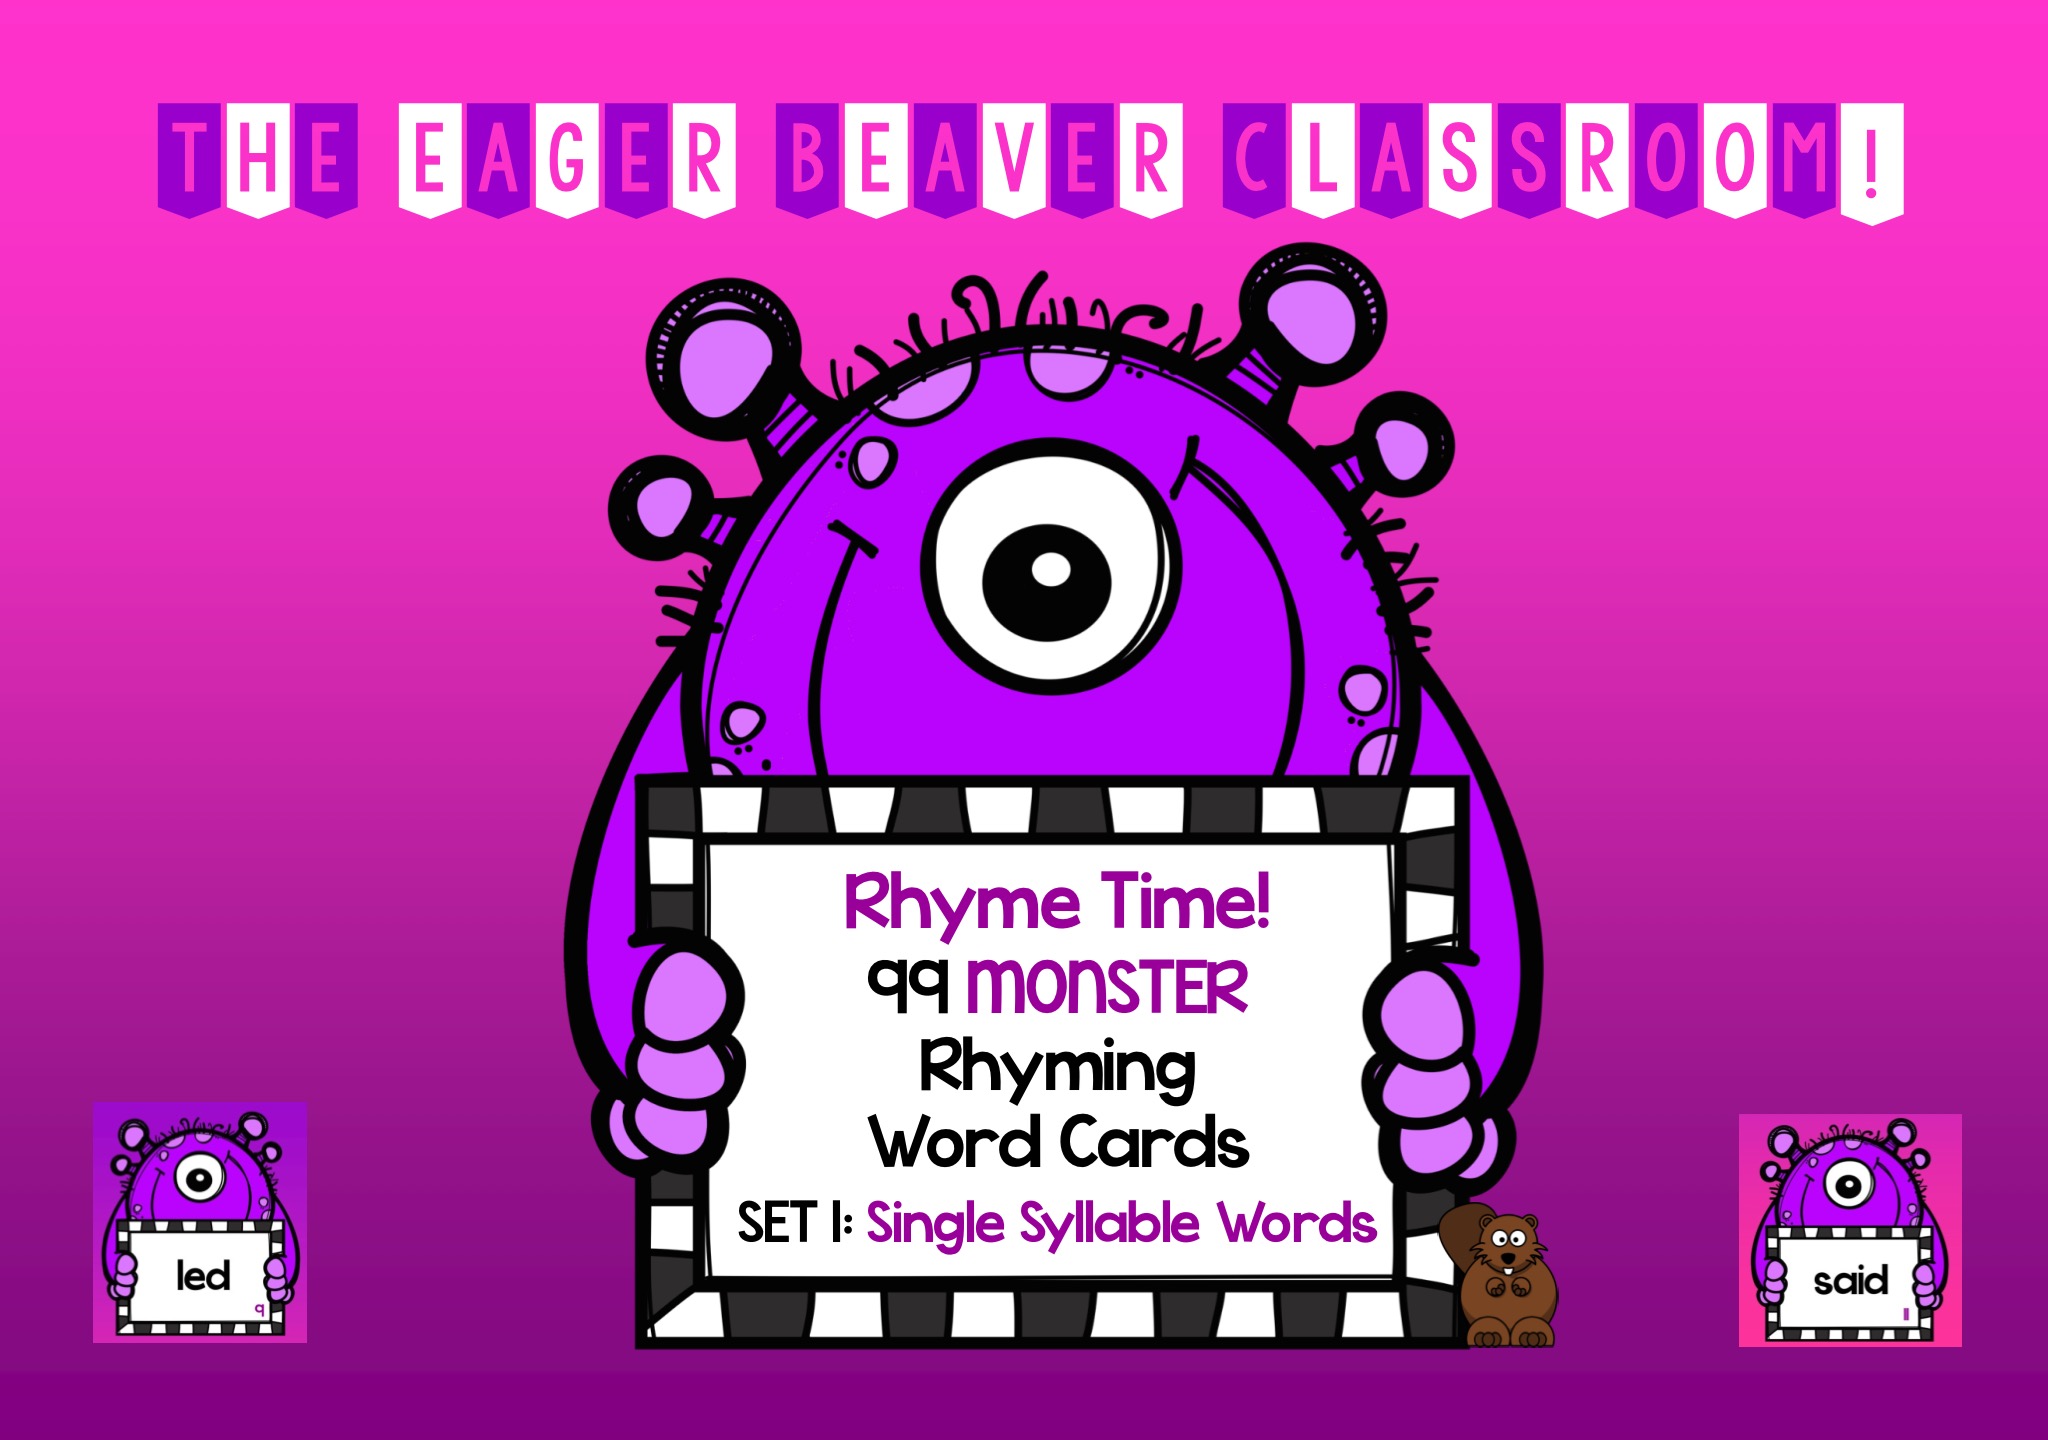 Monster Rhyme Time! 99 Monster Rhyming Cards, Single-syllable Words, Set 1